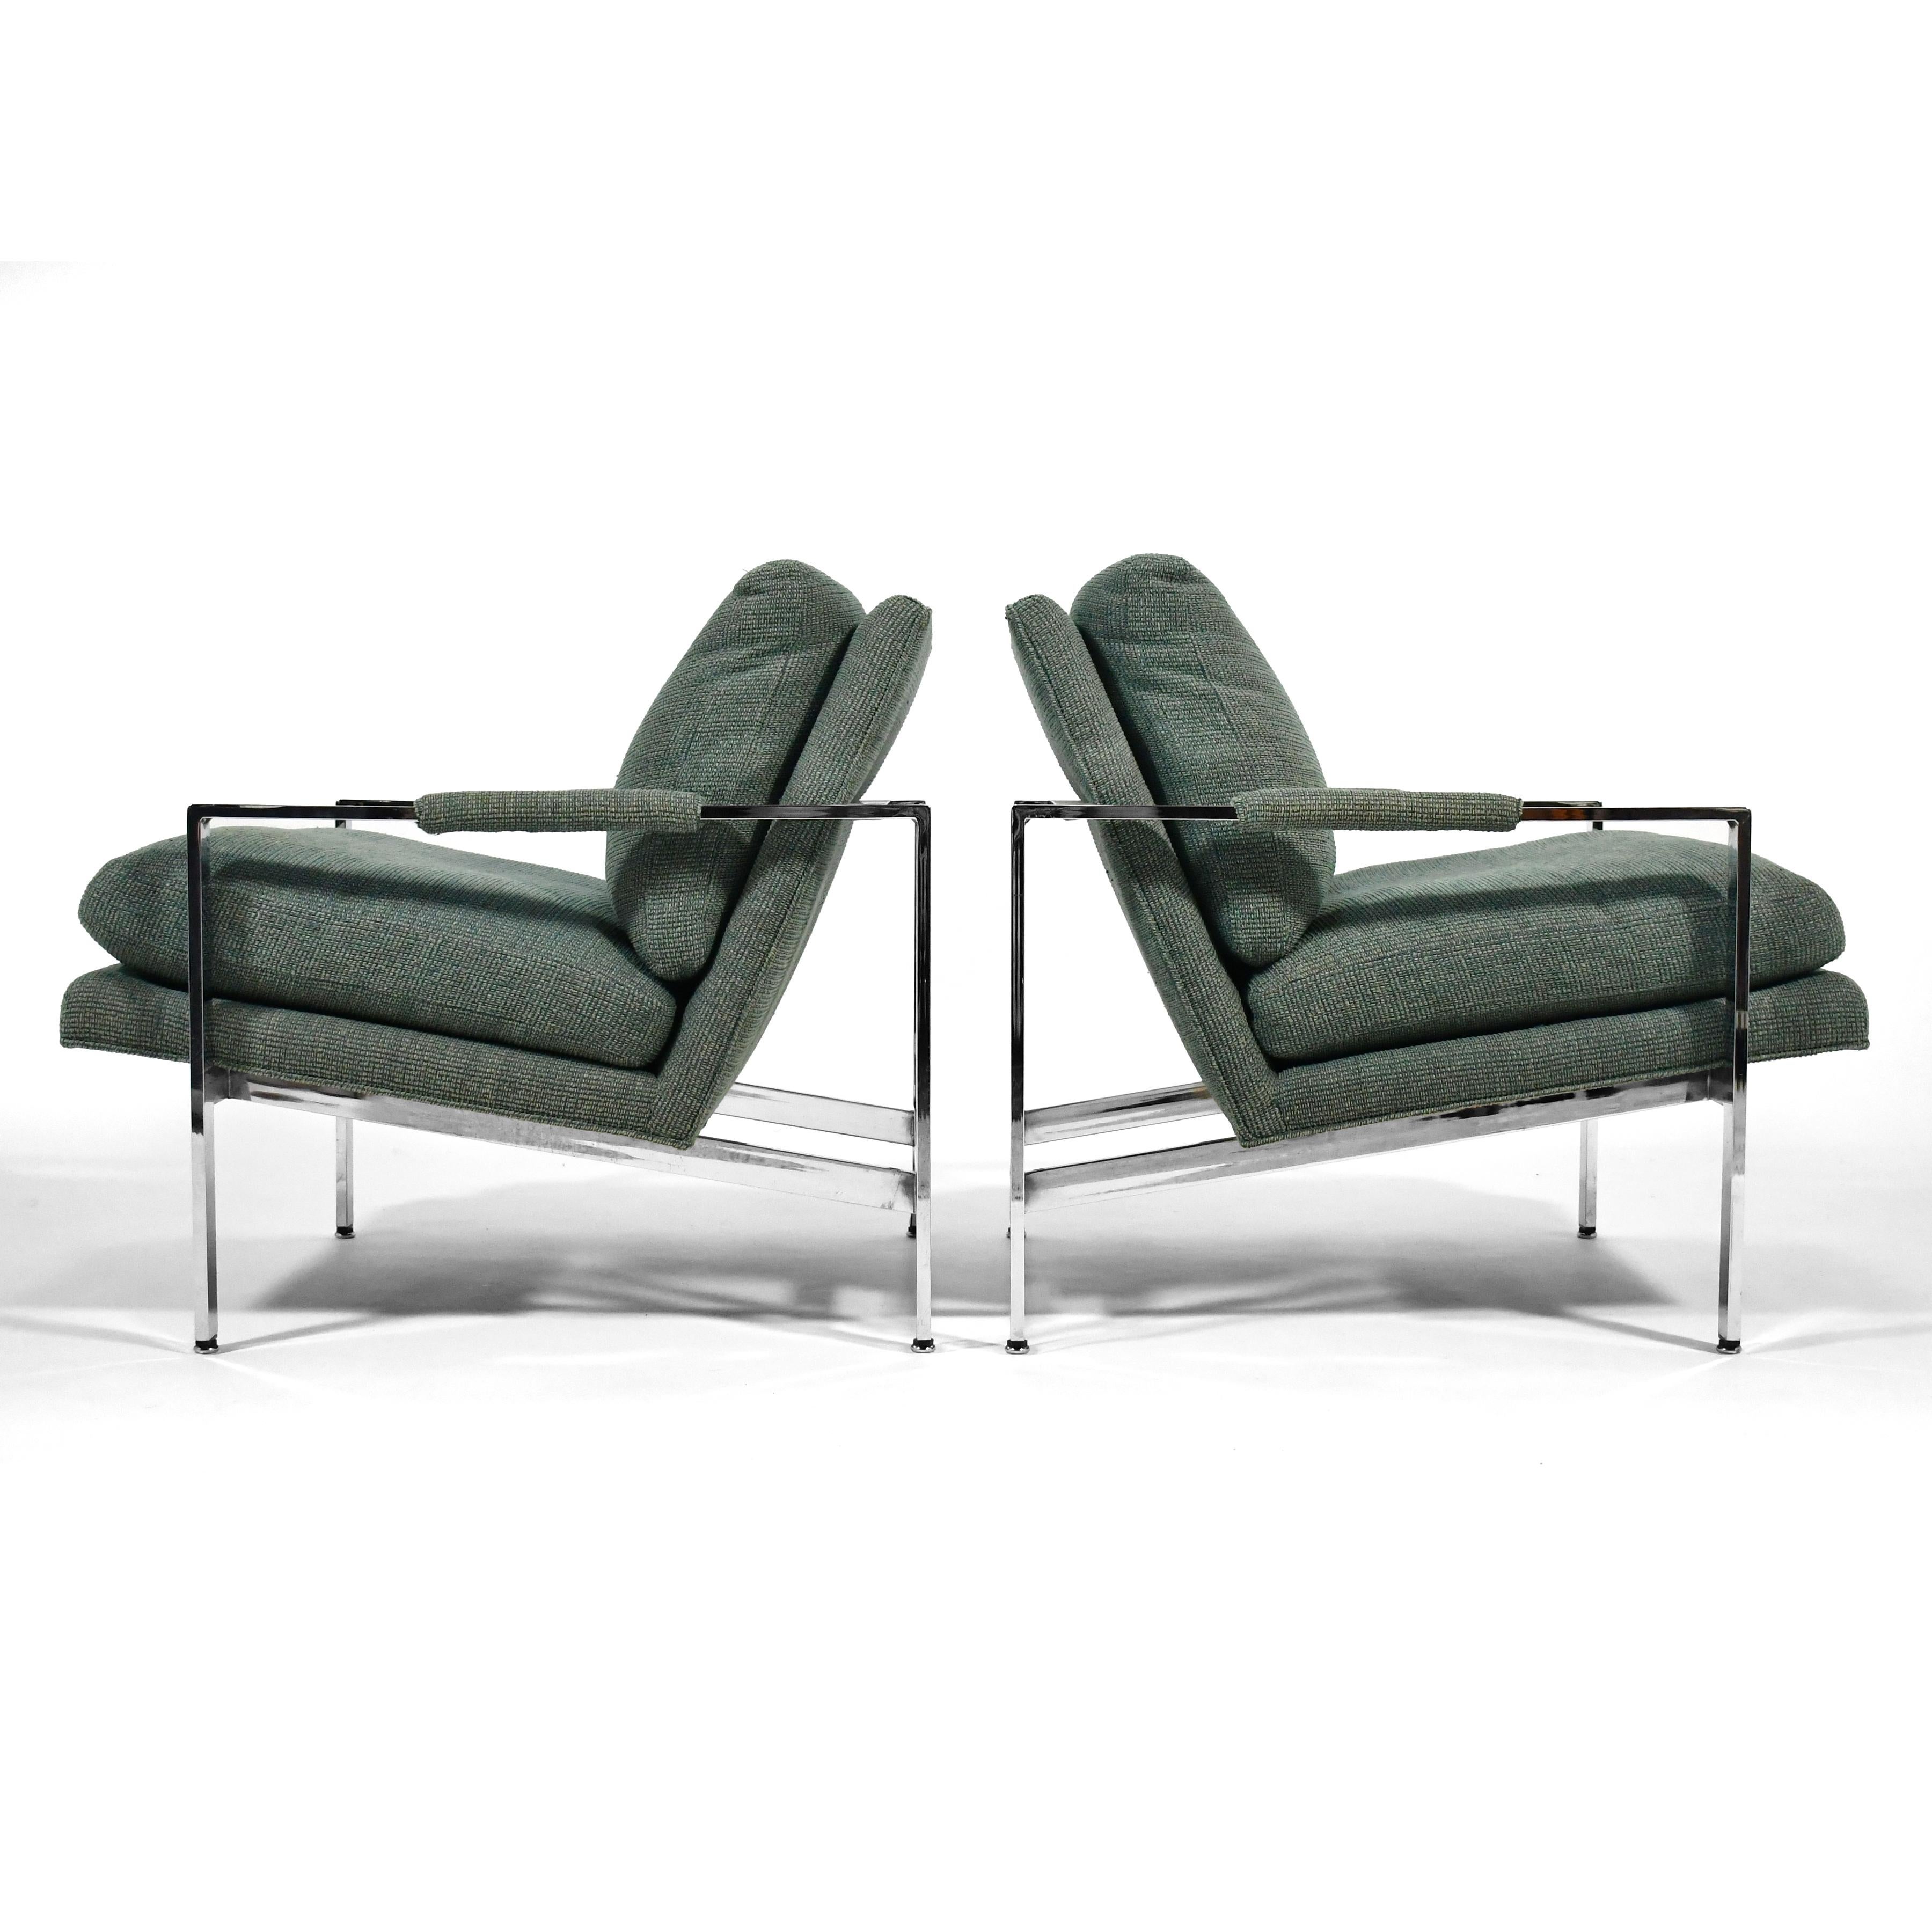 Steel Milo Baughman Pair of Lounge Chairs by Thayer Coggin